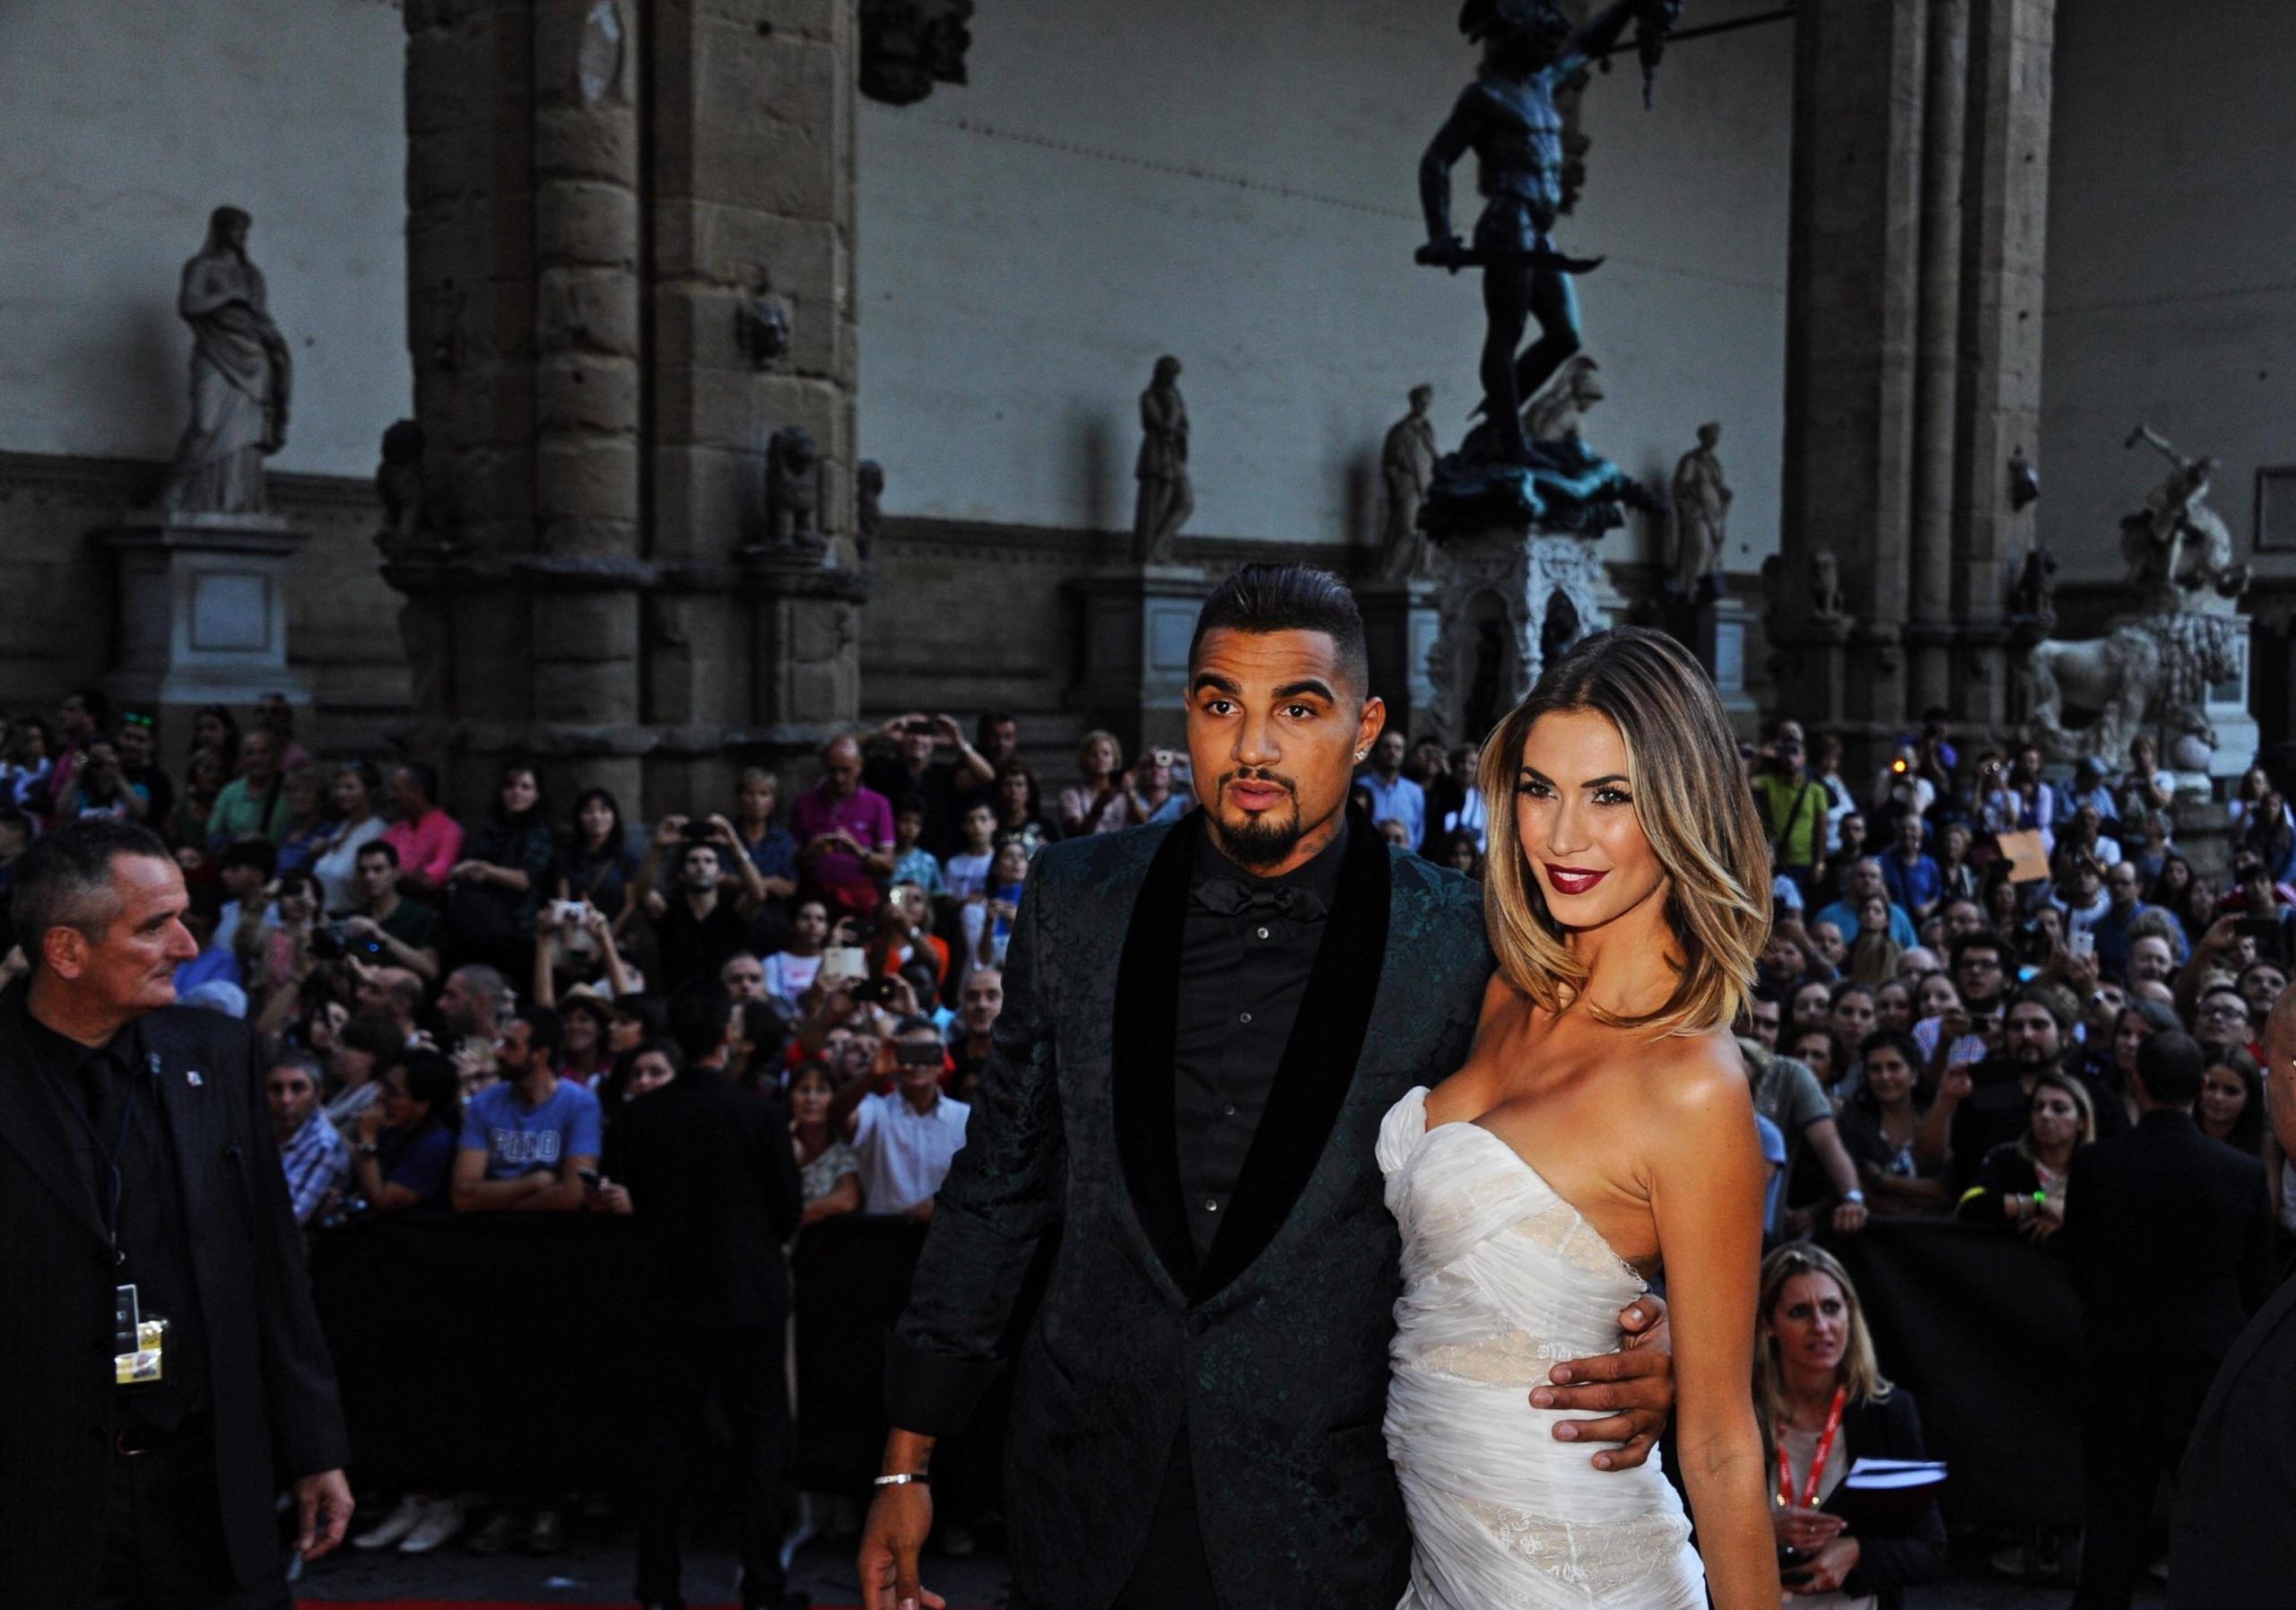 Kevin Prince Boateng si racconta come padre